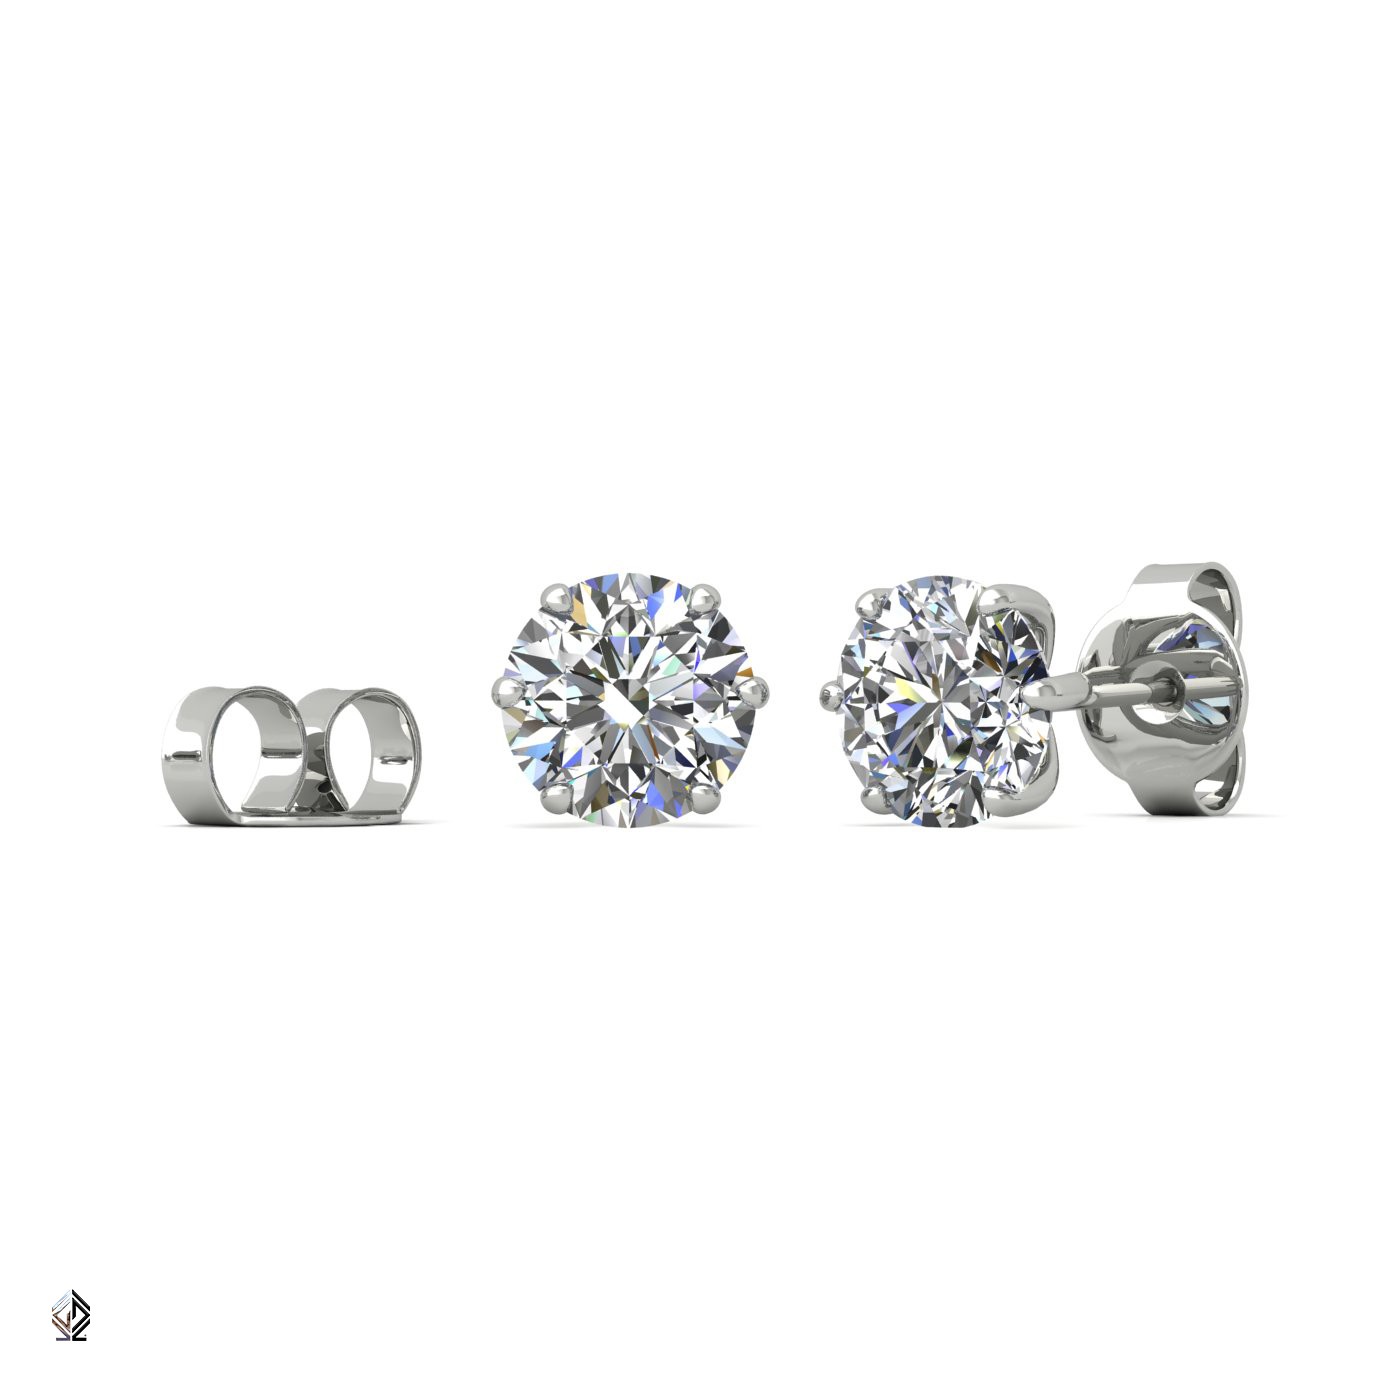 18k white gold 2.5 ct each (5,0 tcw) 6 prongs round shape diamond earrings Photos & images